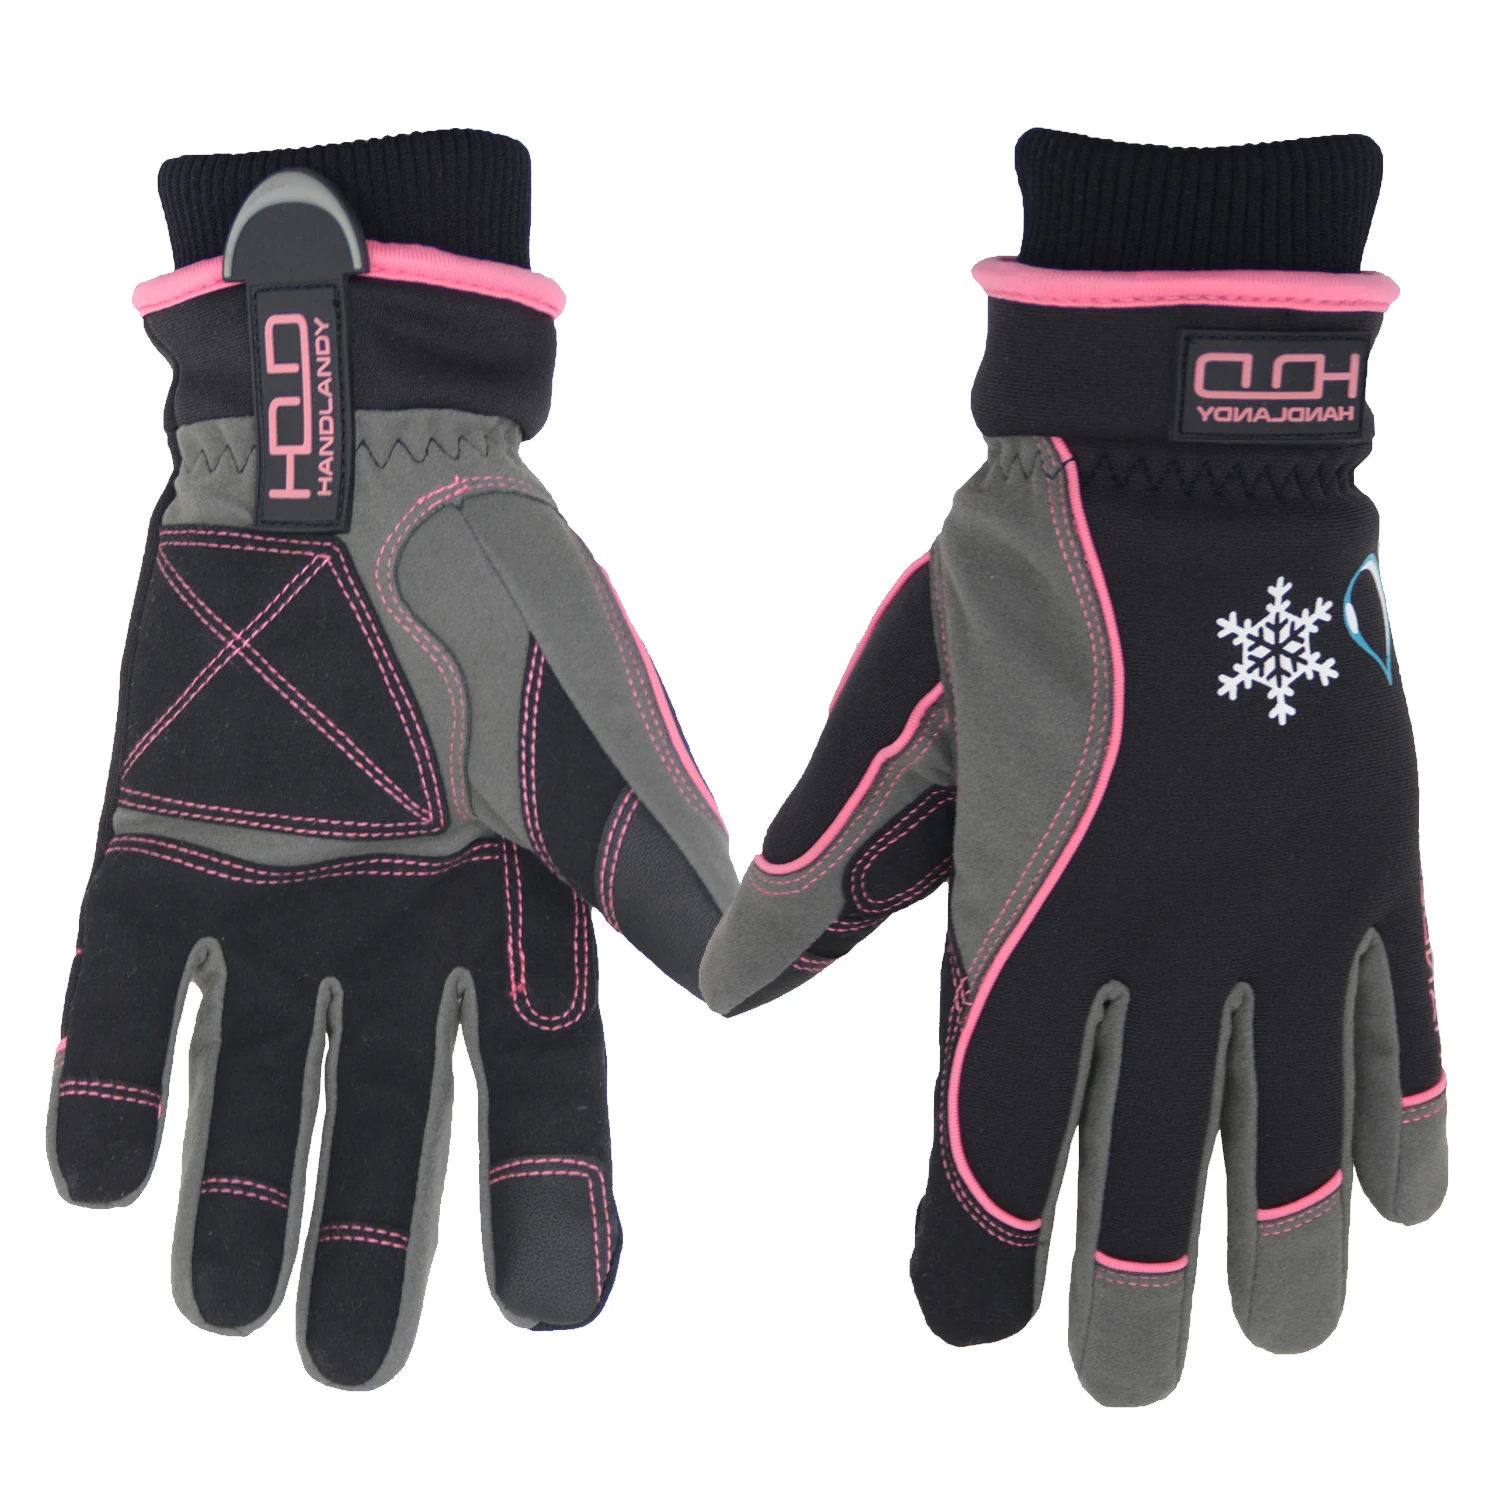 

HANDLANDY Pink Warm Heated Ski Snowboard Cold Weather Waterproof Windproof Touch Screen Women Winter Gloves, Pink/any customized color